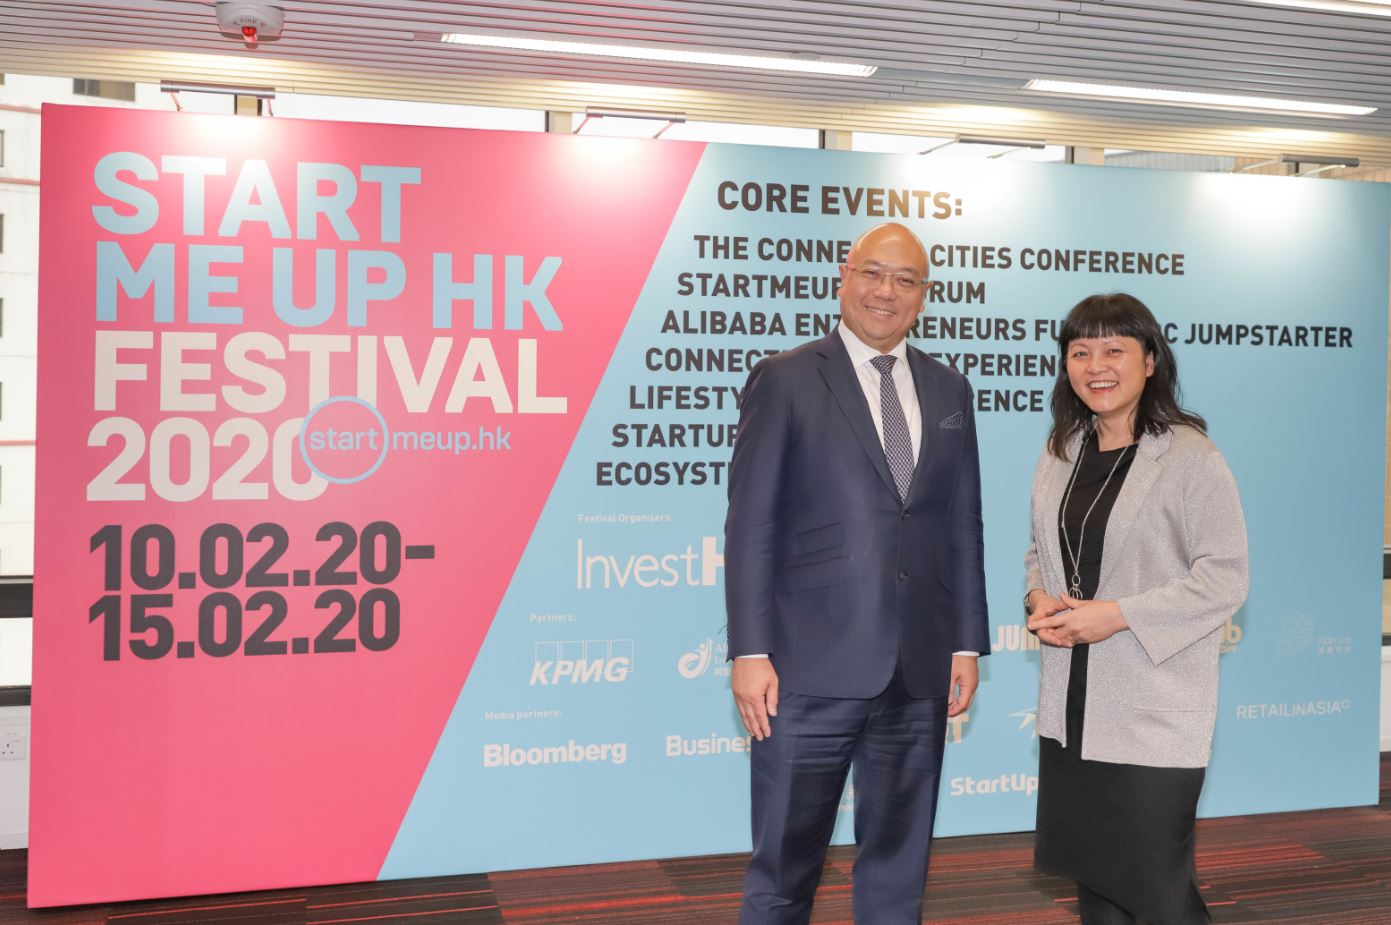 Invest Hong Kong (InvestHK) hosted a media briefing today (20 January 2020) to announce core events of the extended StartmeupHK Festival 2020. Photo shows Associate Director-General of Investment Promotion at InvestHK Mr Charles Ng (left) and the Head of StartmeupHK at InvestHK, Ms Jayne Chan, hosting the media briefing.